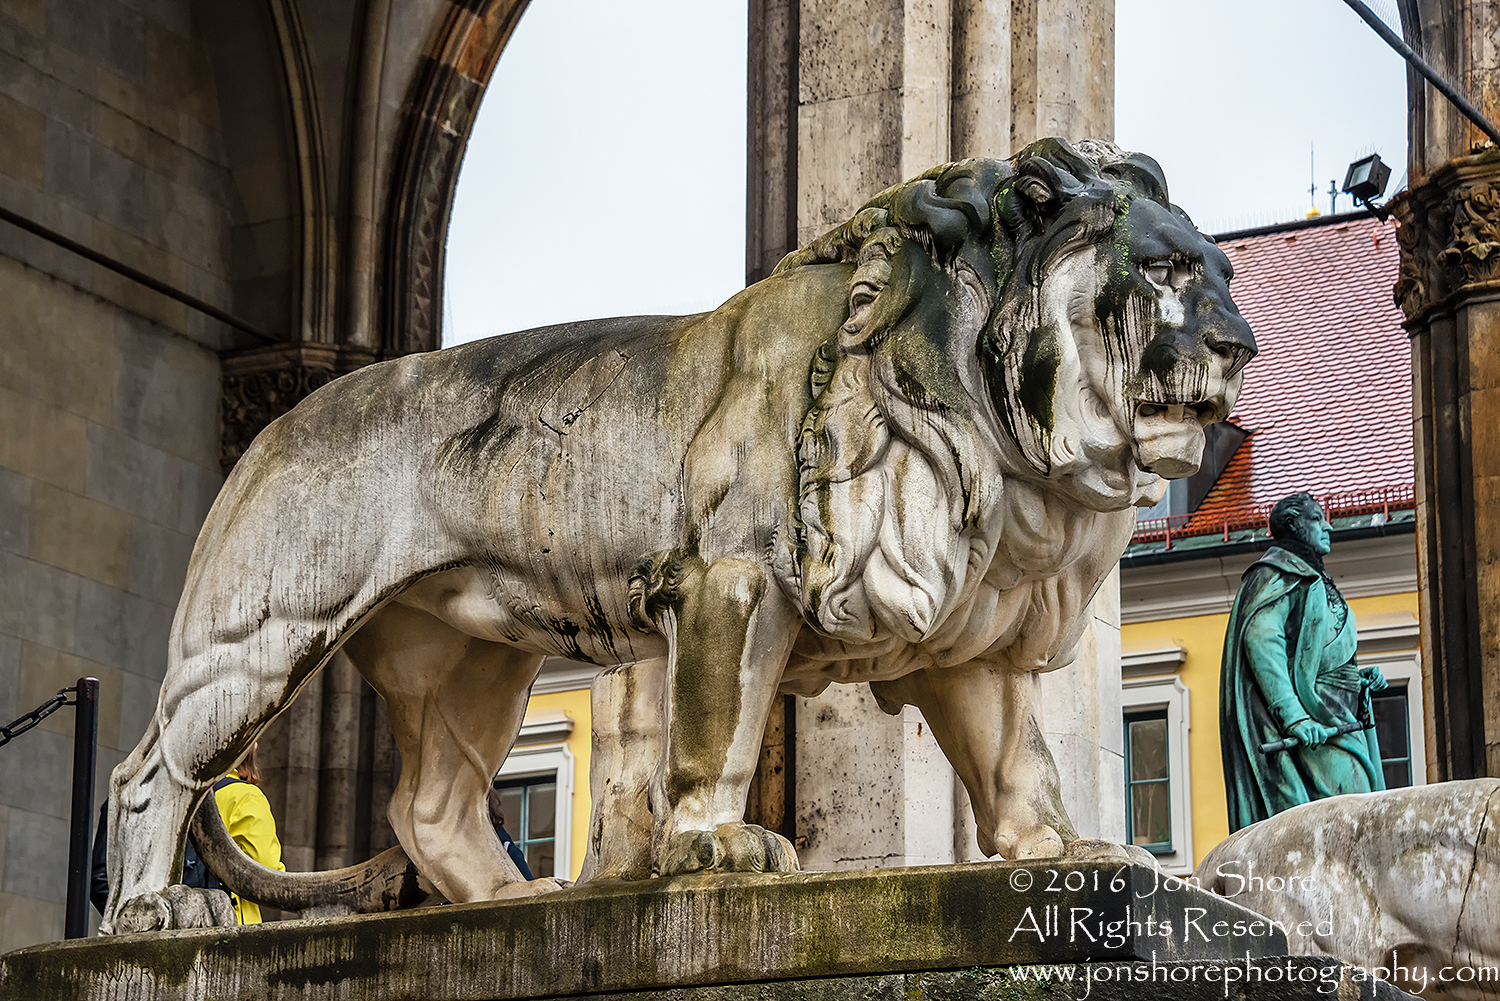 Crying Lion, Munich, Germany. Nikkor 200mm